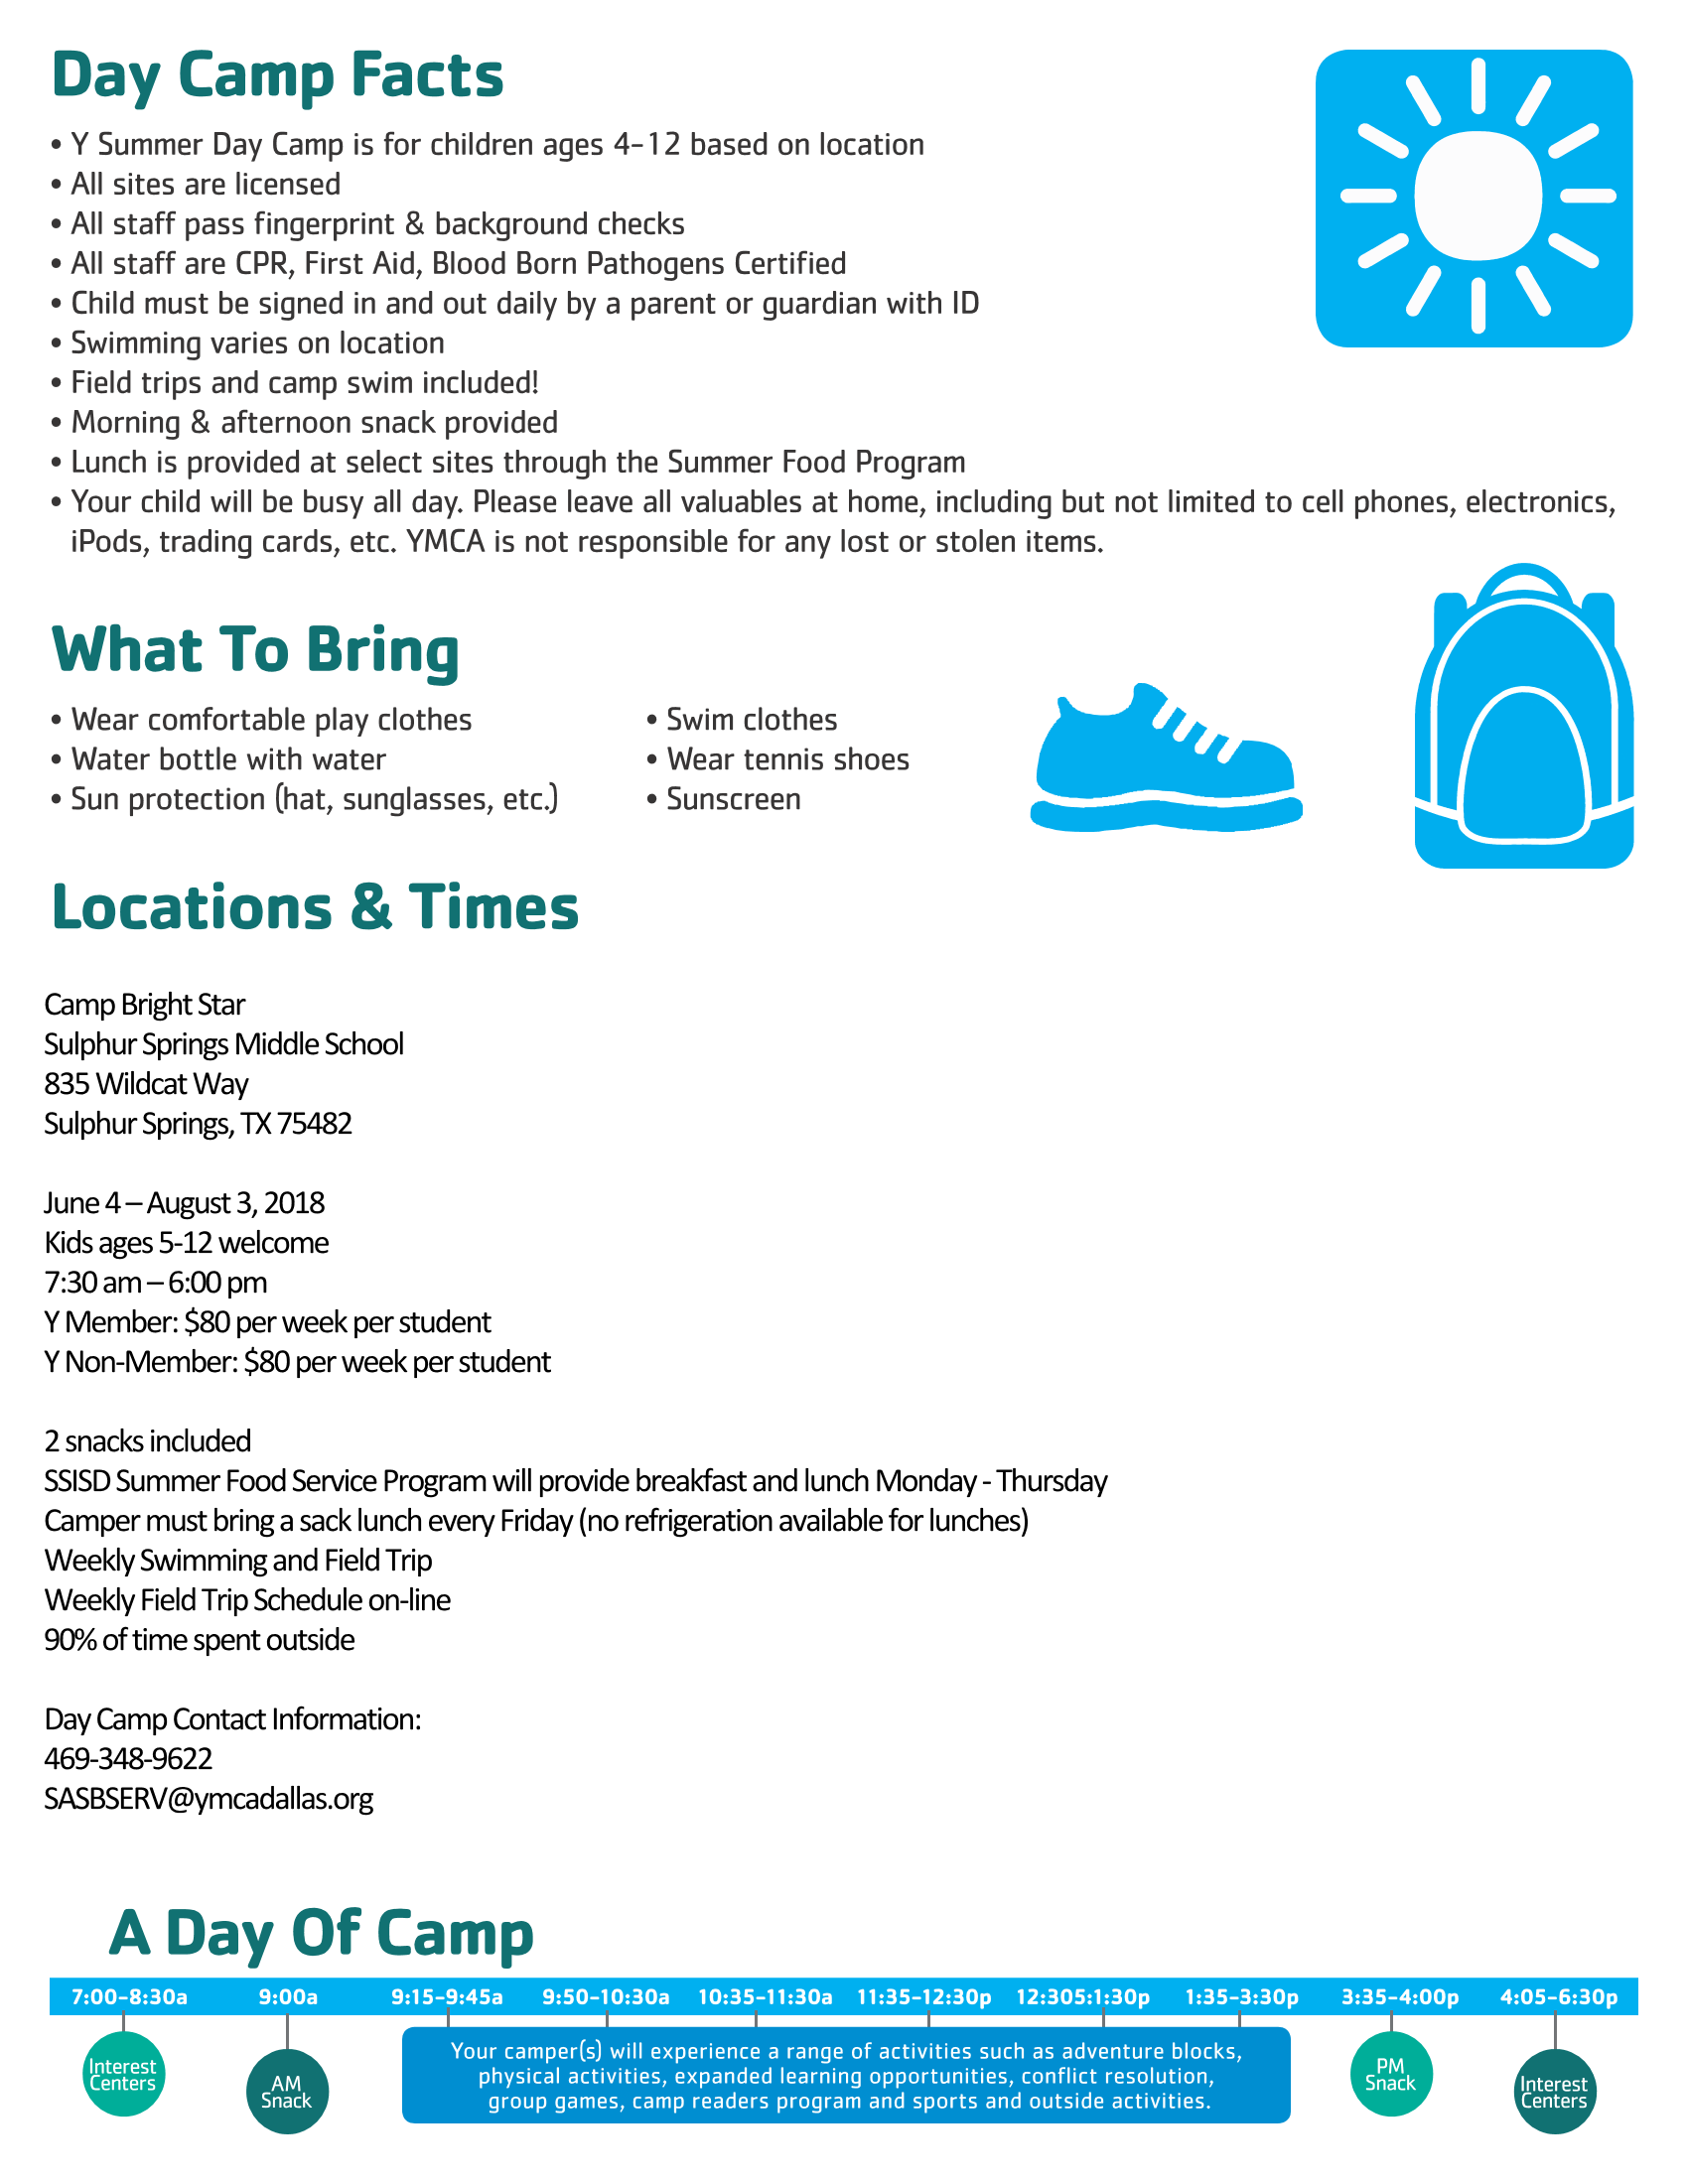 YMCA Offering Day Camp at Sulphur Springs Middle School June 4th-August 3rd